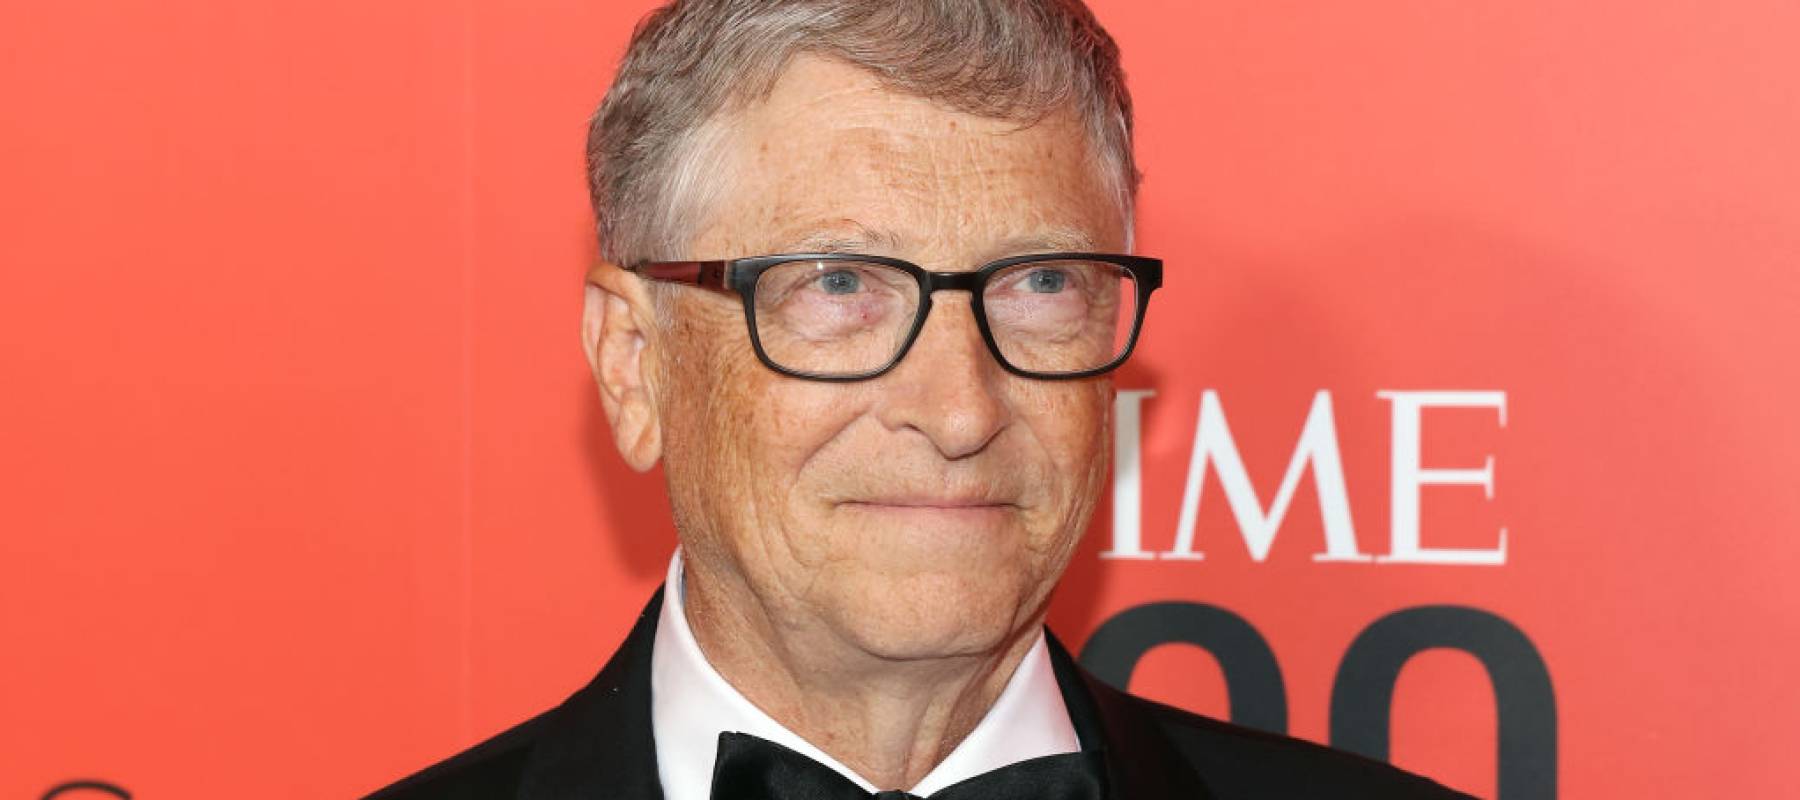 Bill Gates attends the 2022 Time 100 Gala at Frederick P. Rose Hall